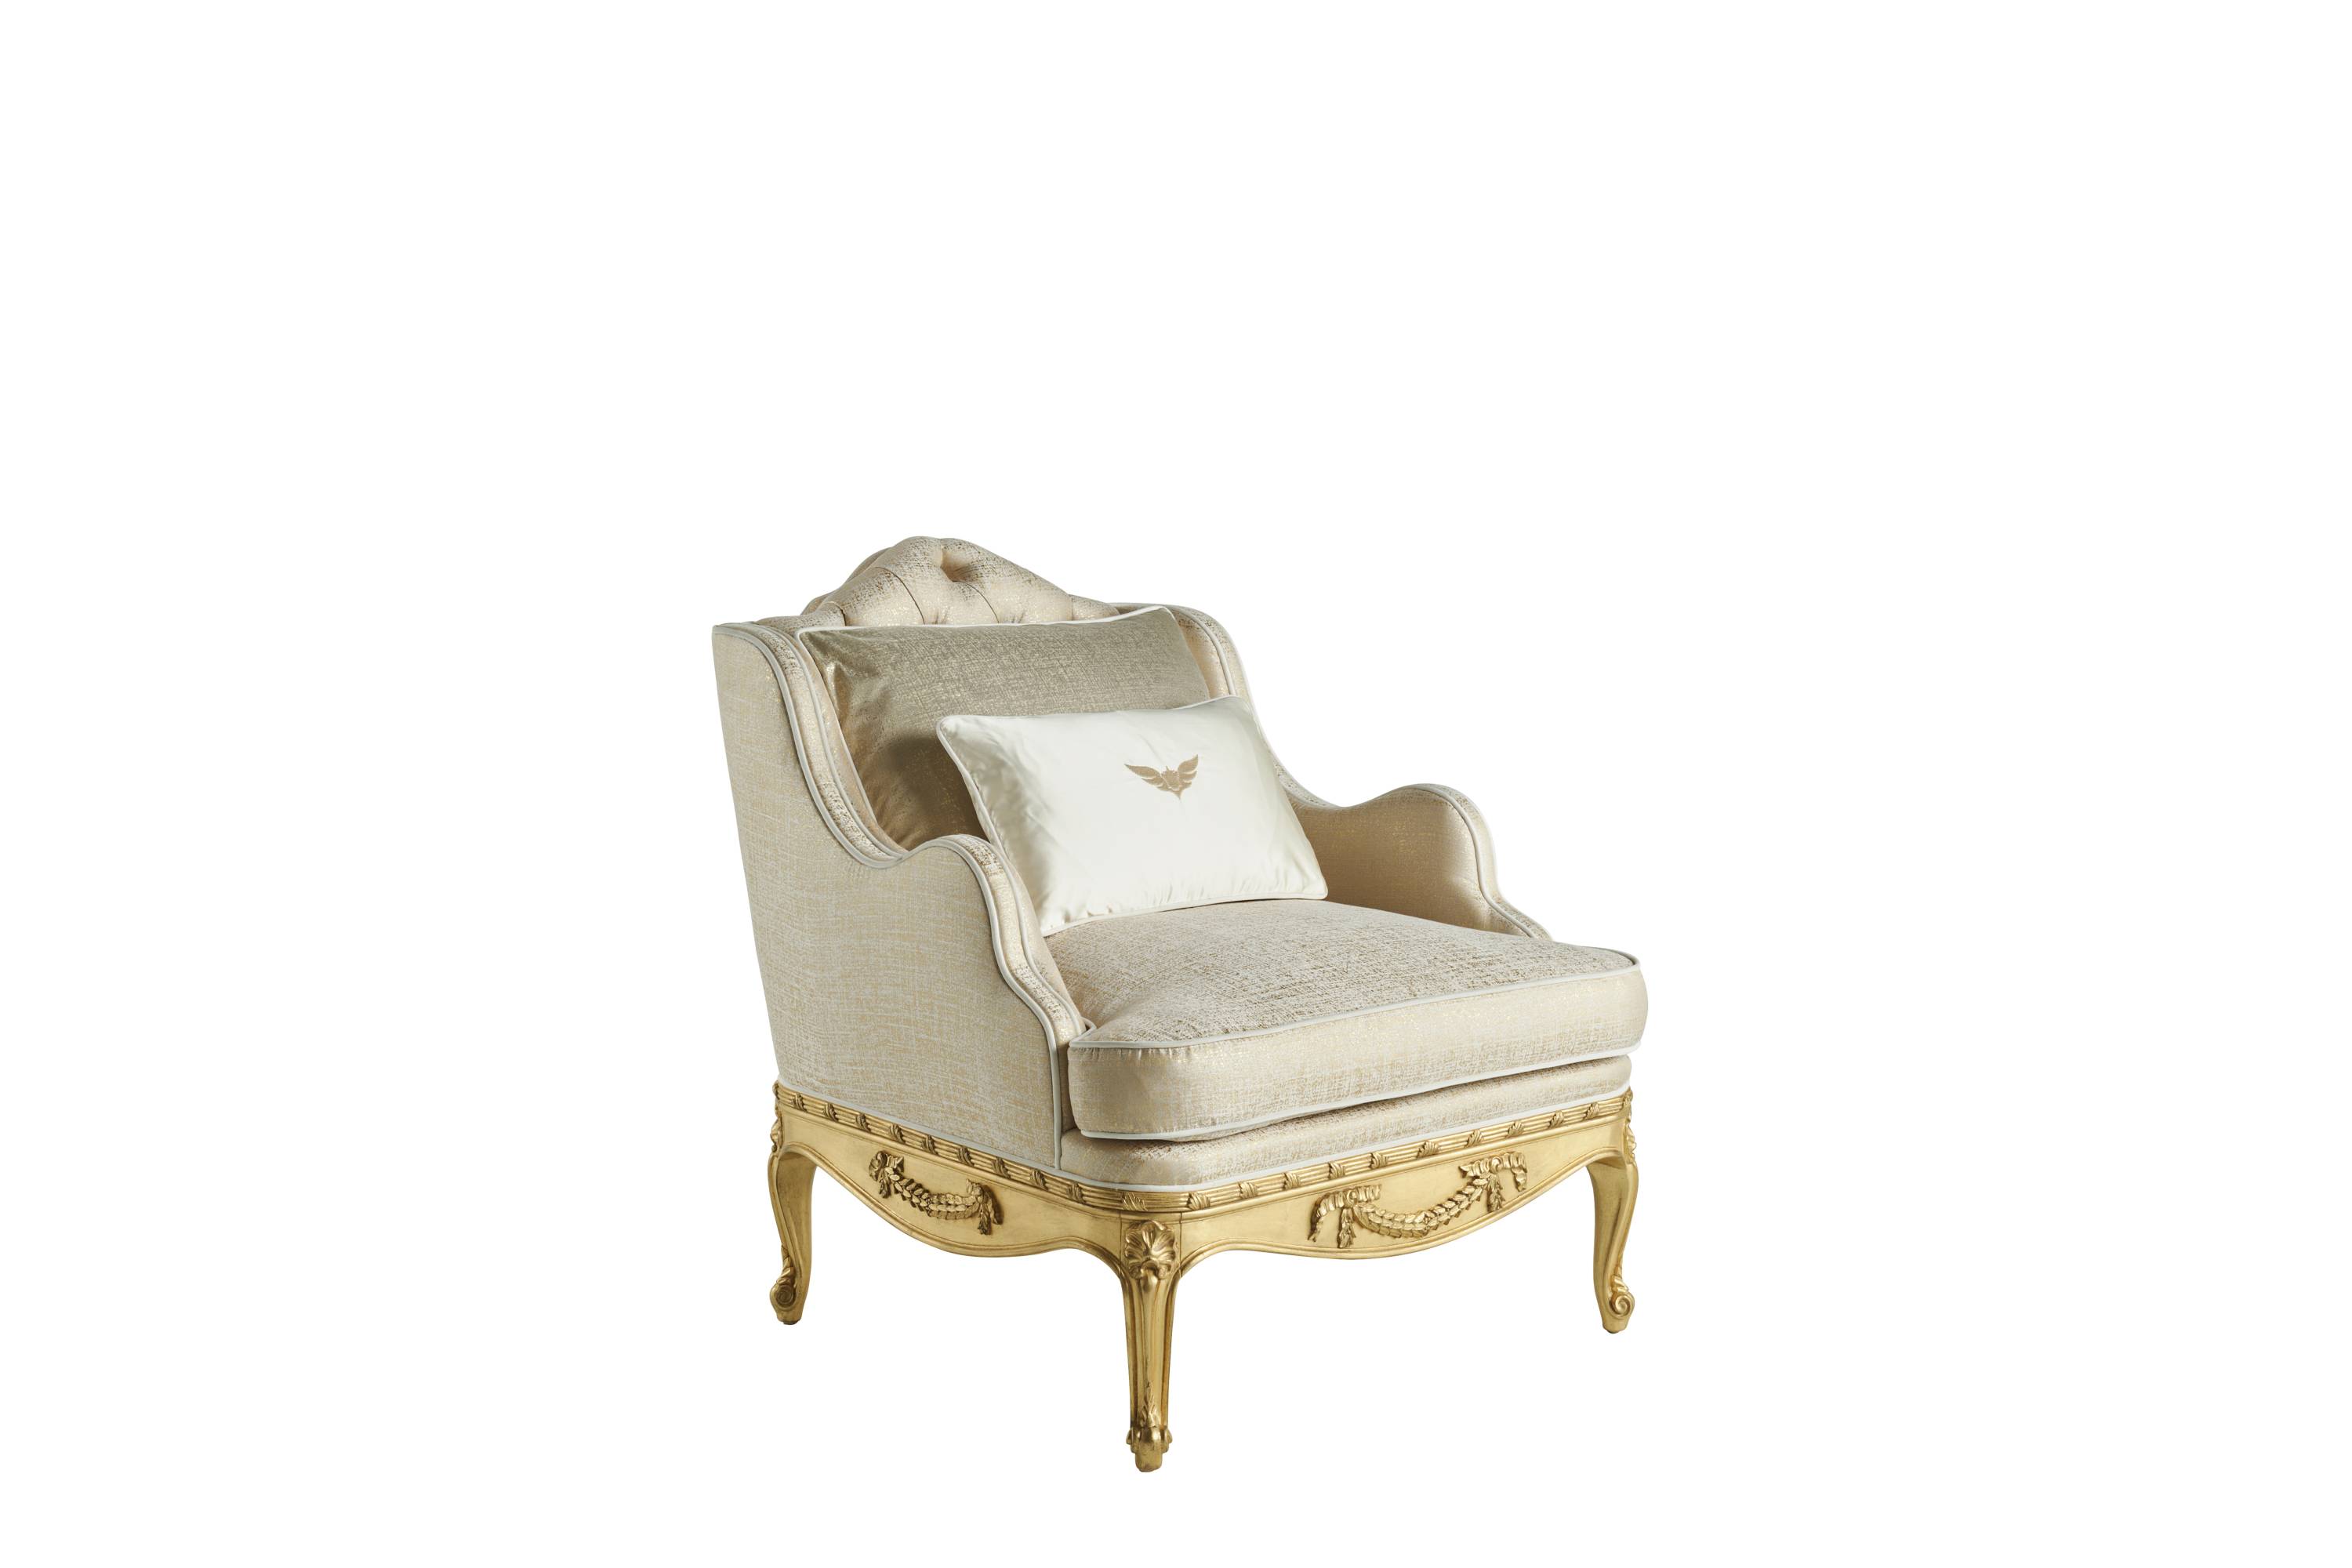 VERVEINE armchair - Discover the elegance of luxury Héritage collection by Jumbo collection